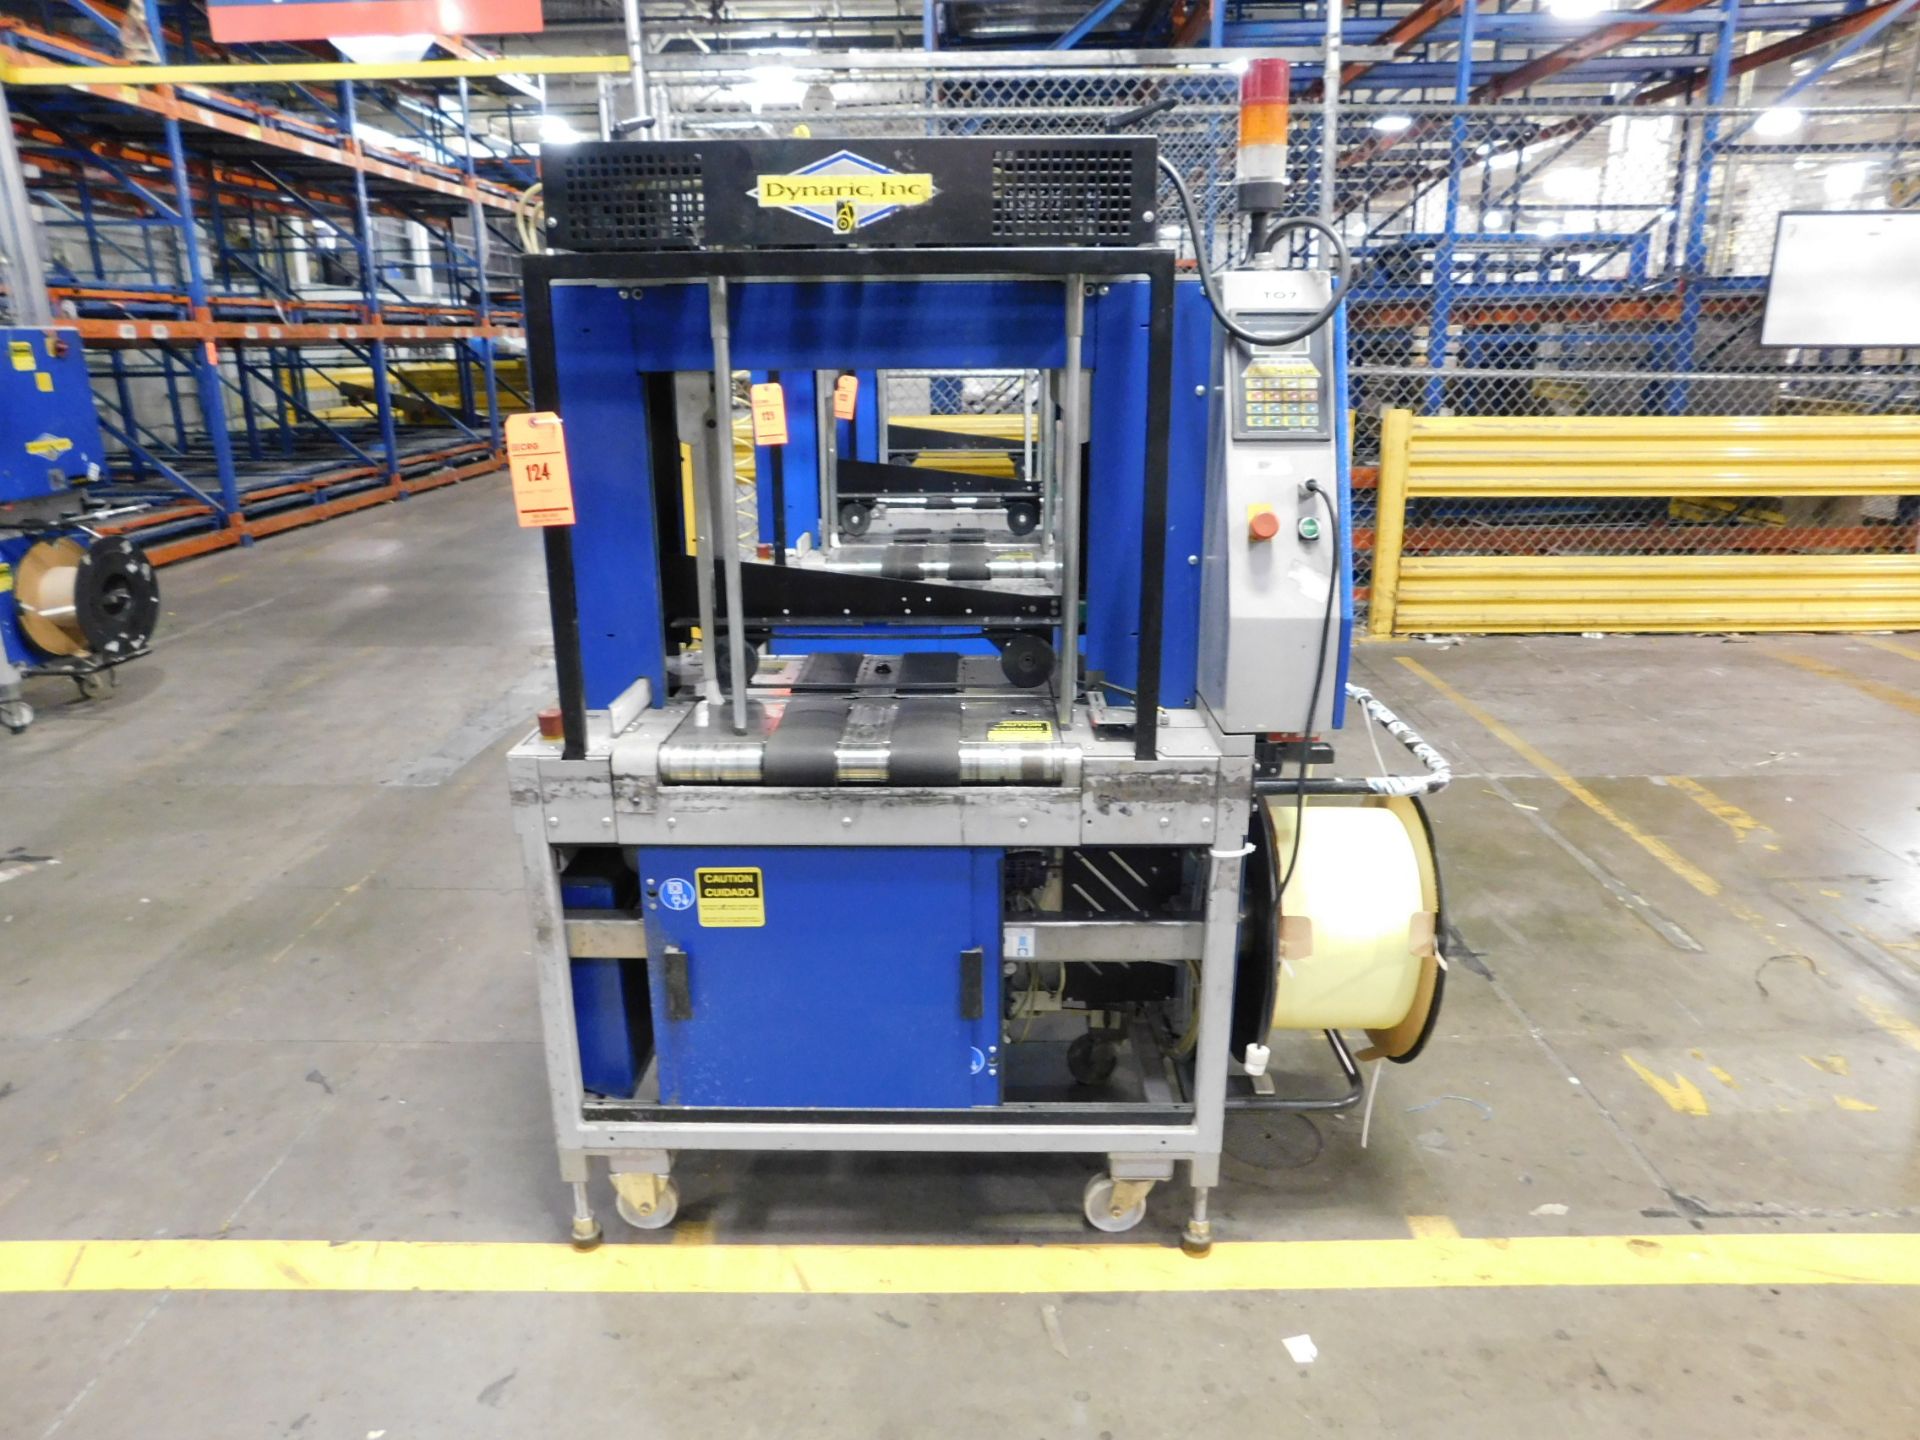 2002 Dynark banding machine with discharge roller conveyor, 5 ft. long by 18 in. wide, asset #